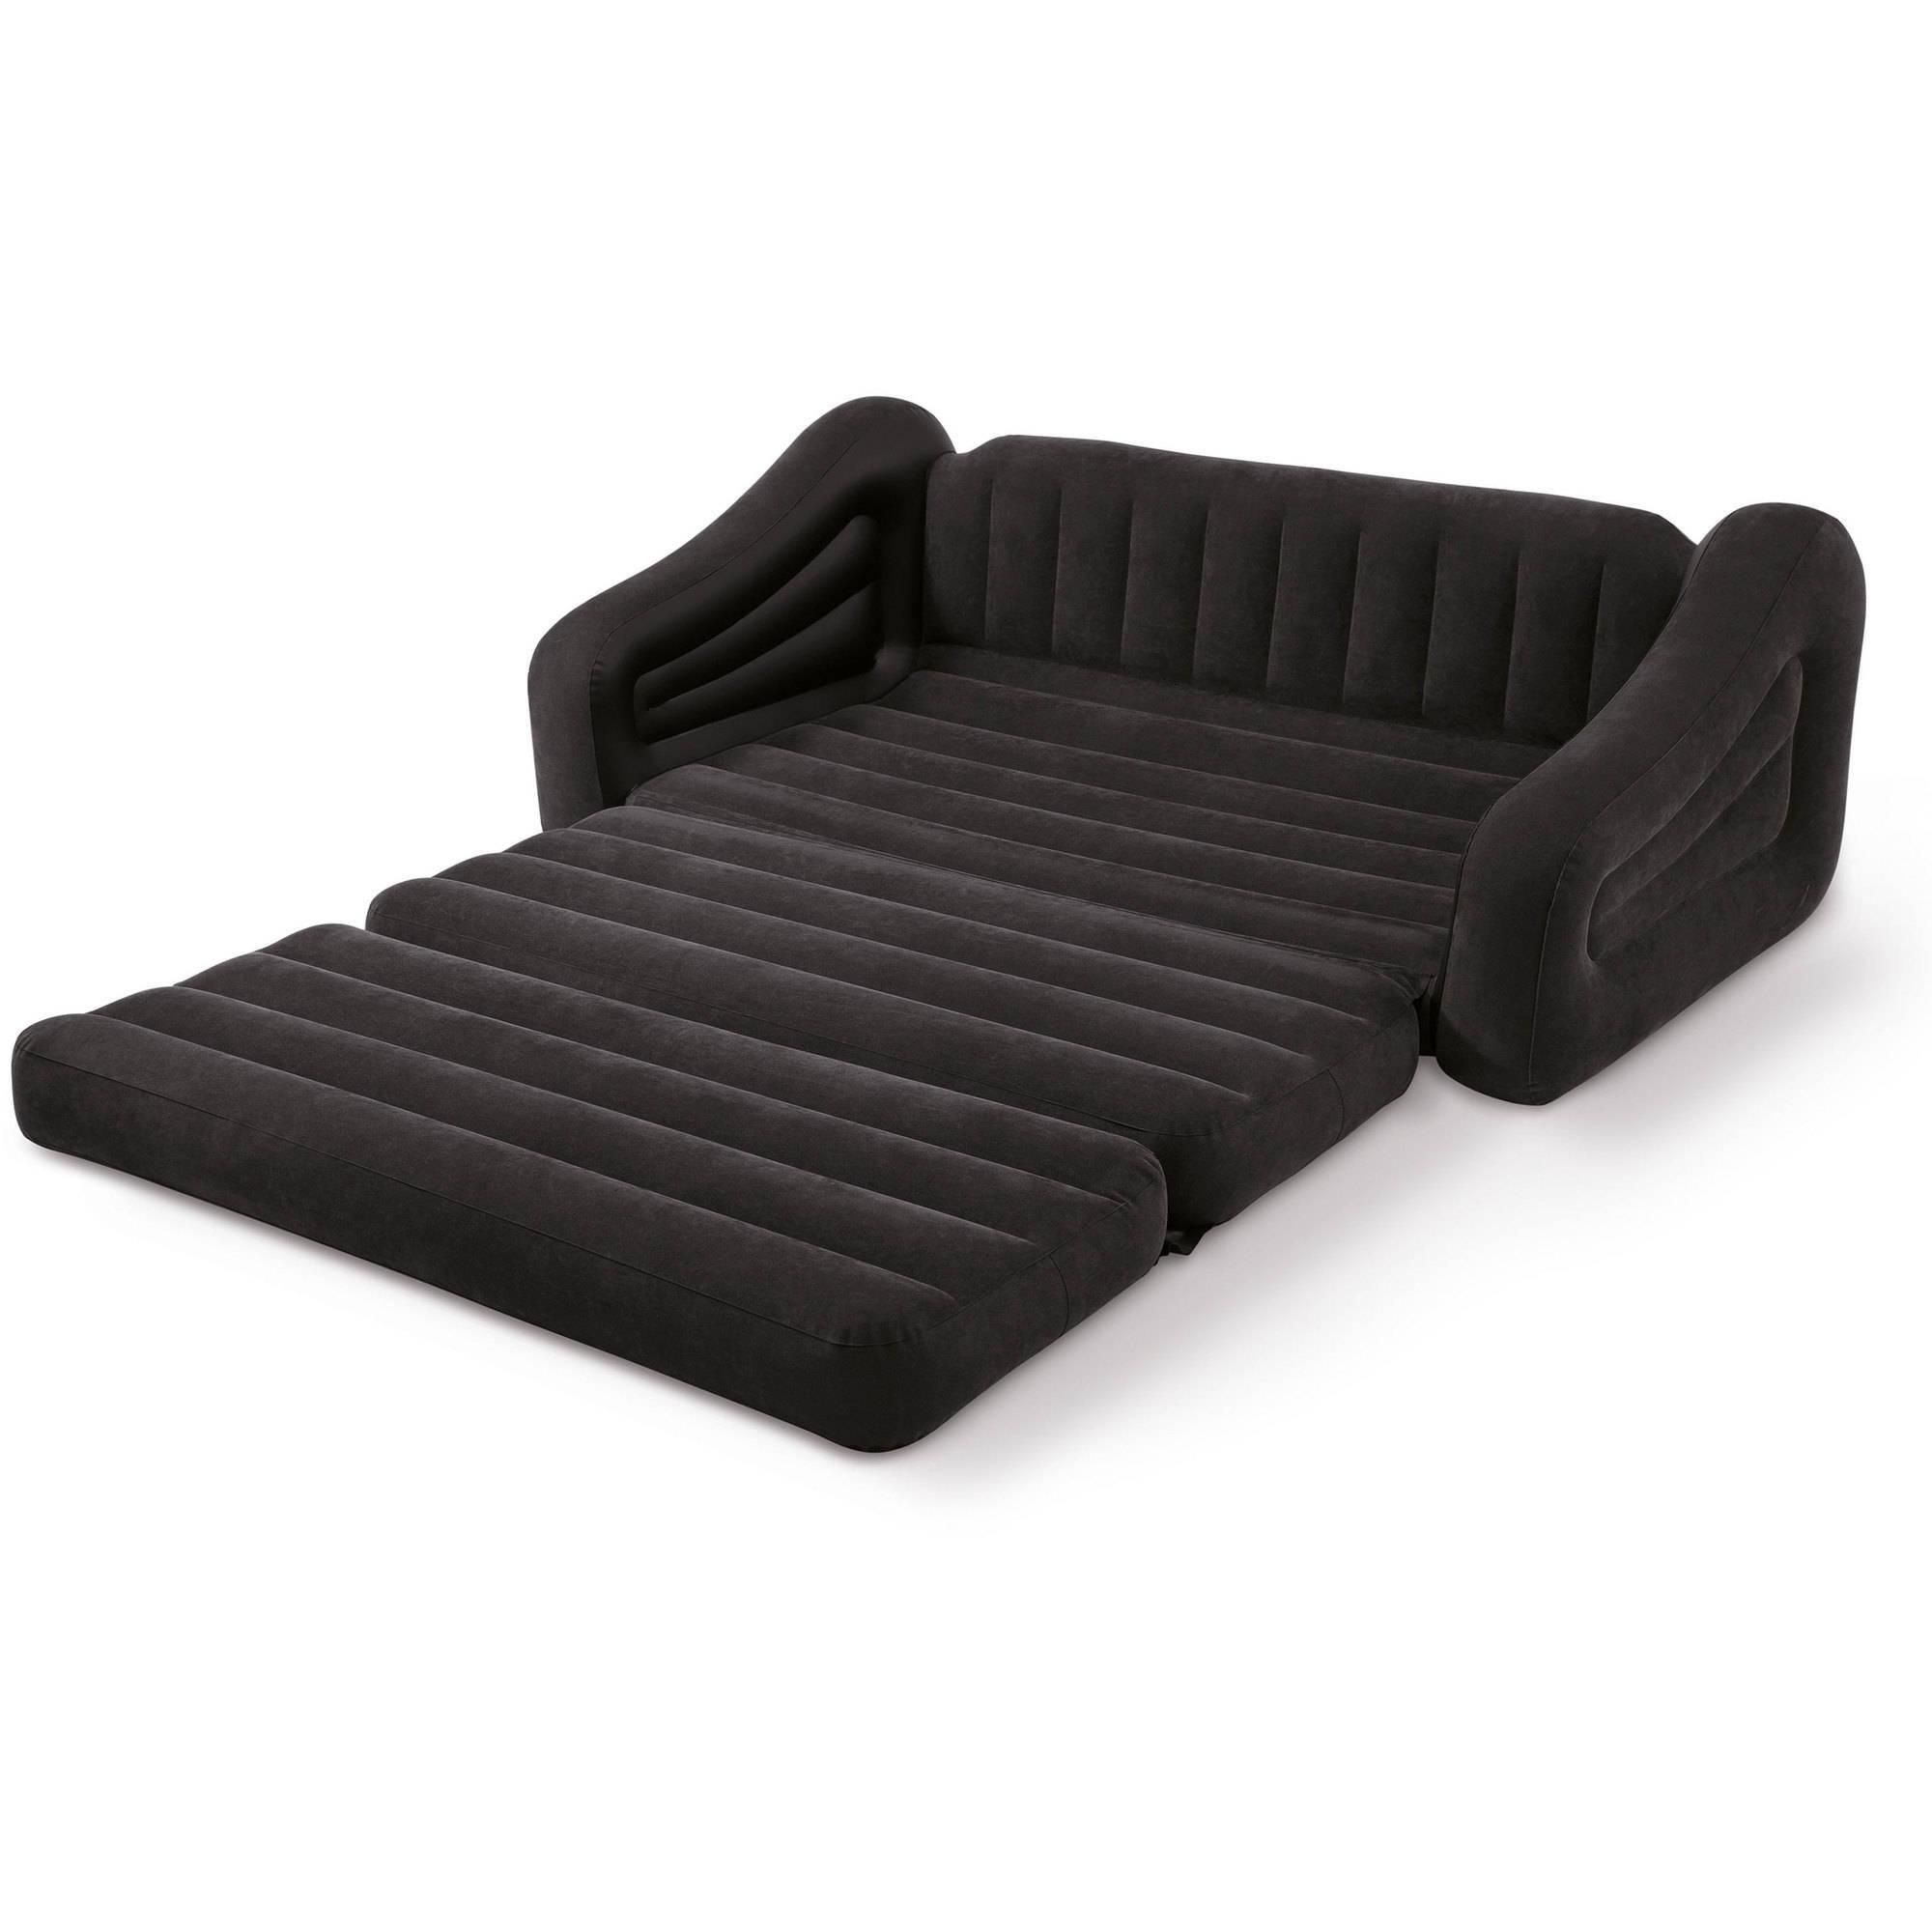 Intex Queen Inflatable Pull Out Sofa Bed – Walmart For Inflatable Full Size Mattress (View 12 of 20)